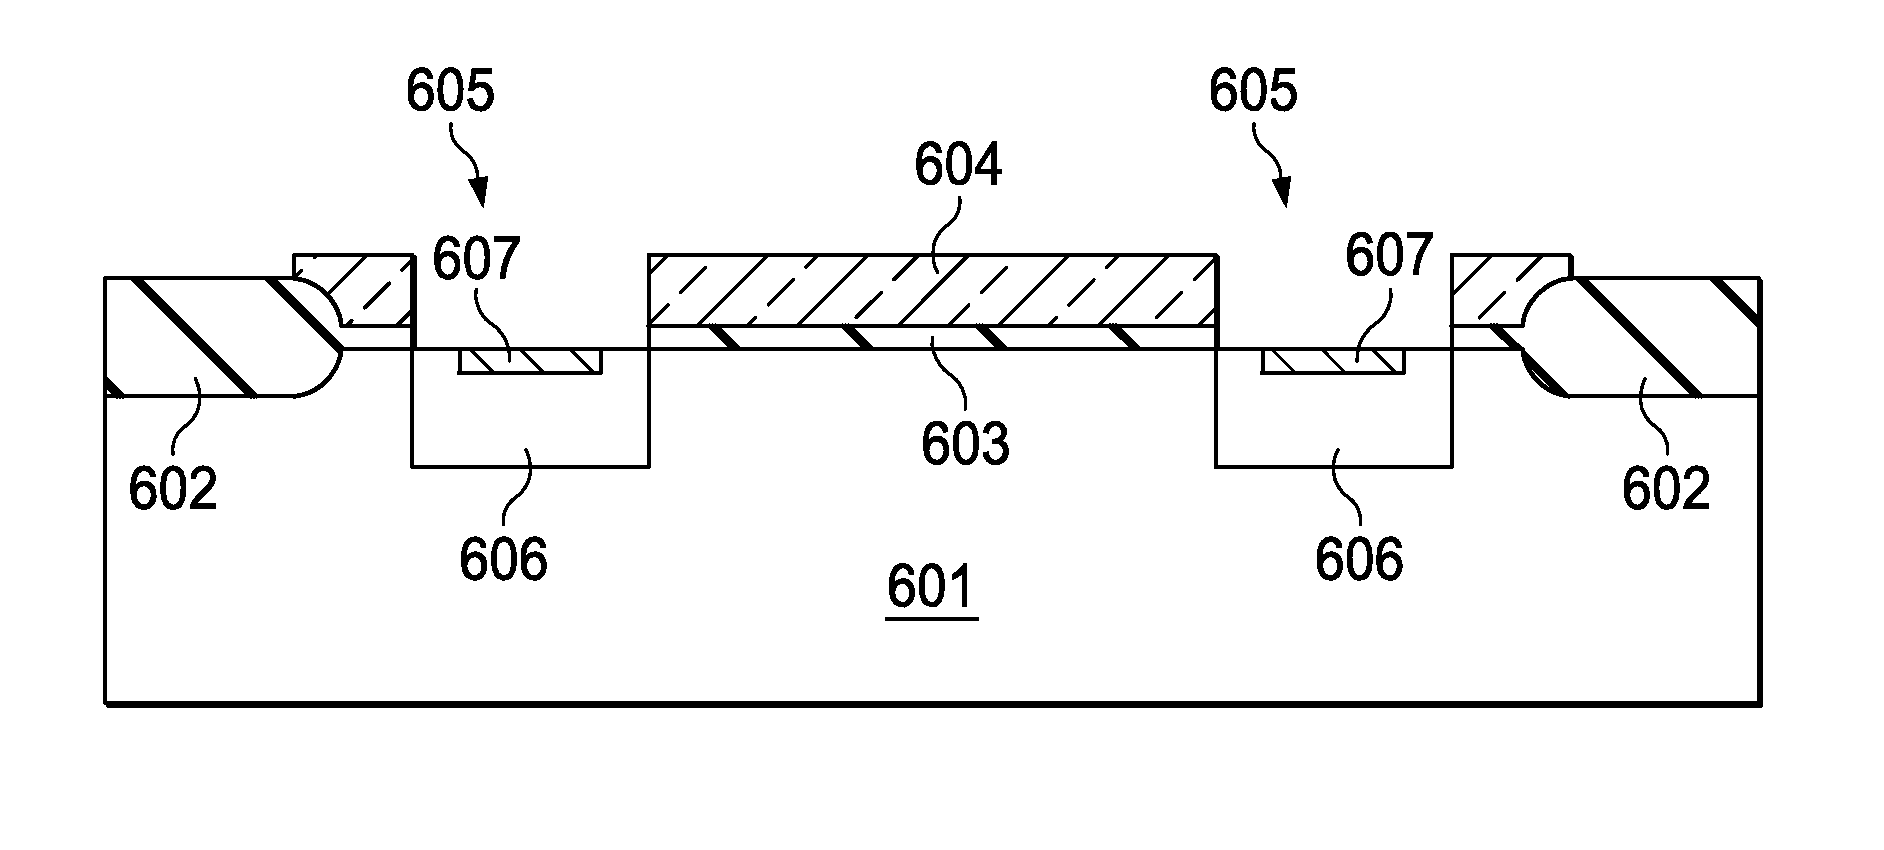 Device having improved radiation hardness and high breakdown voltages